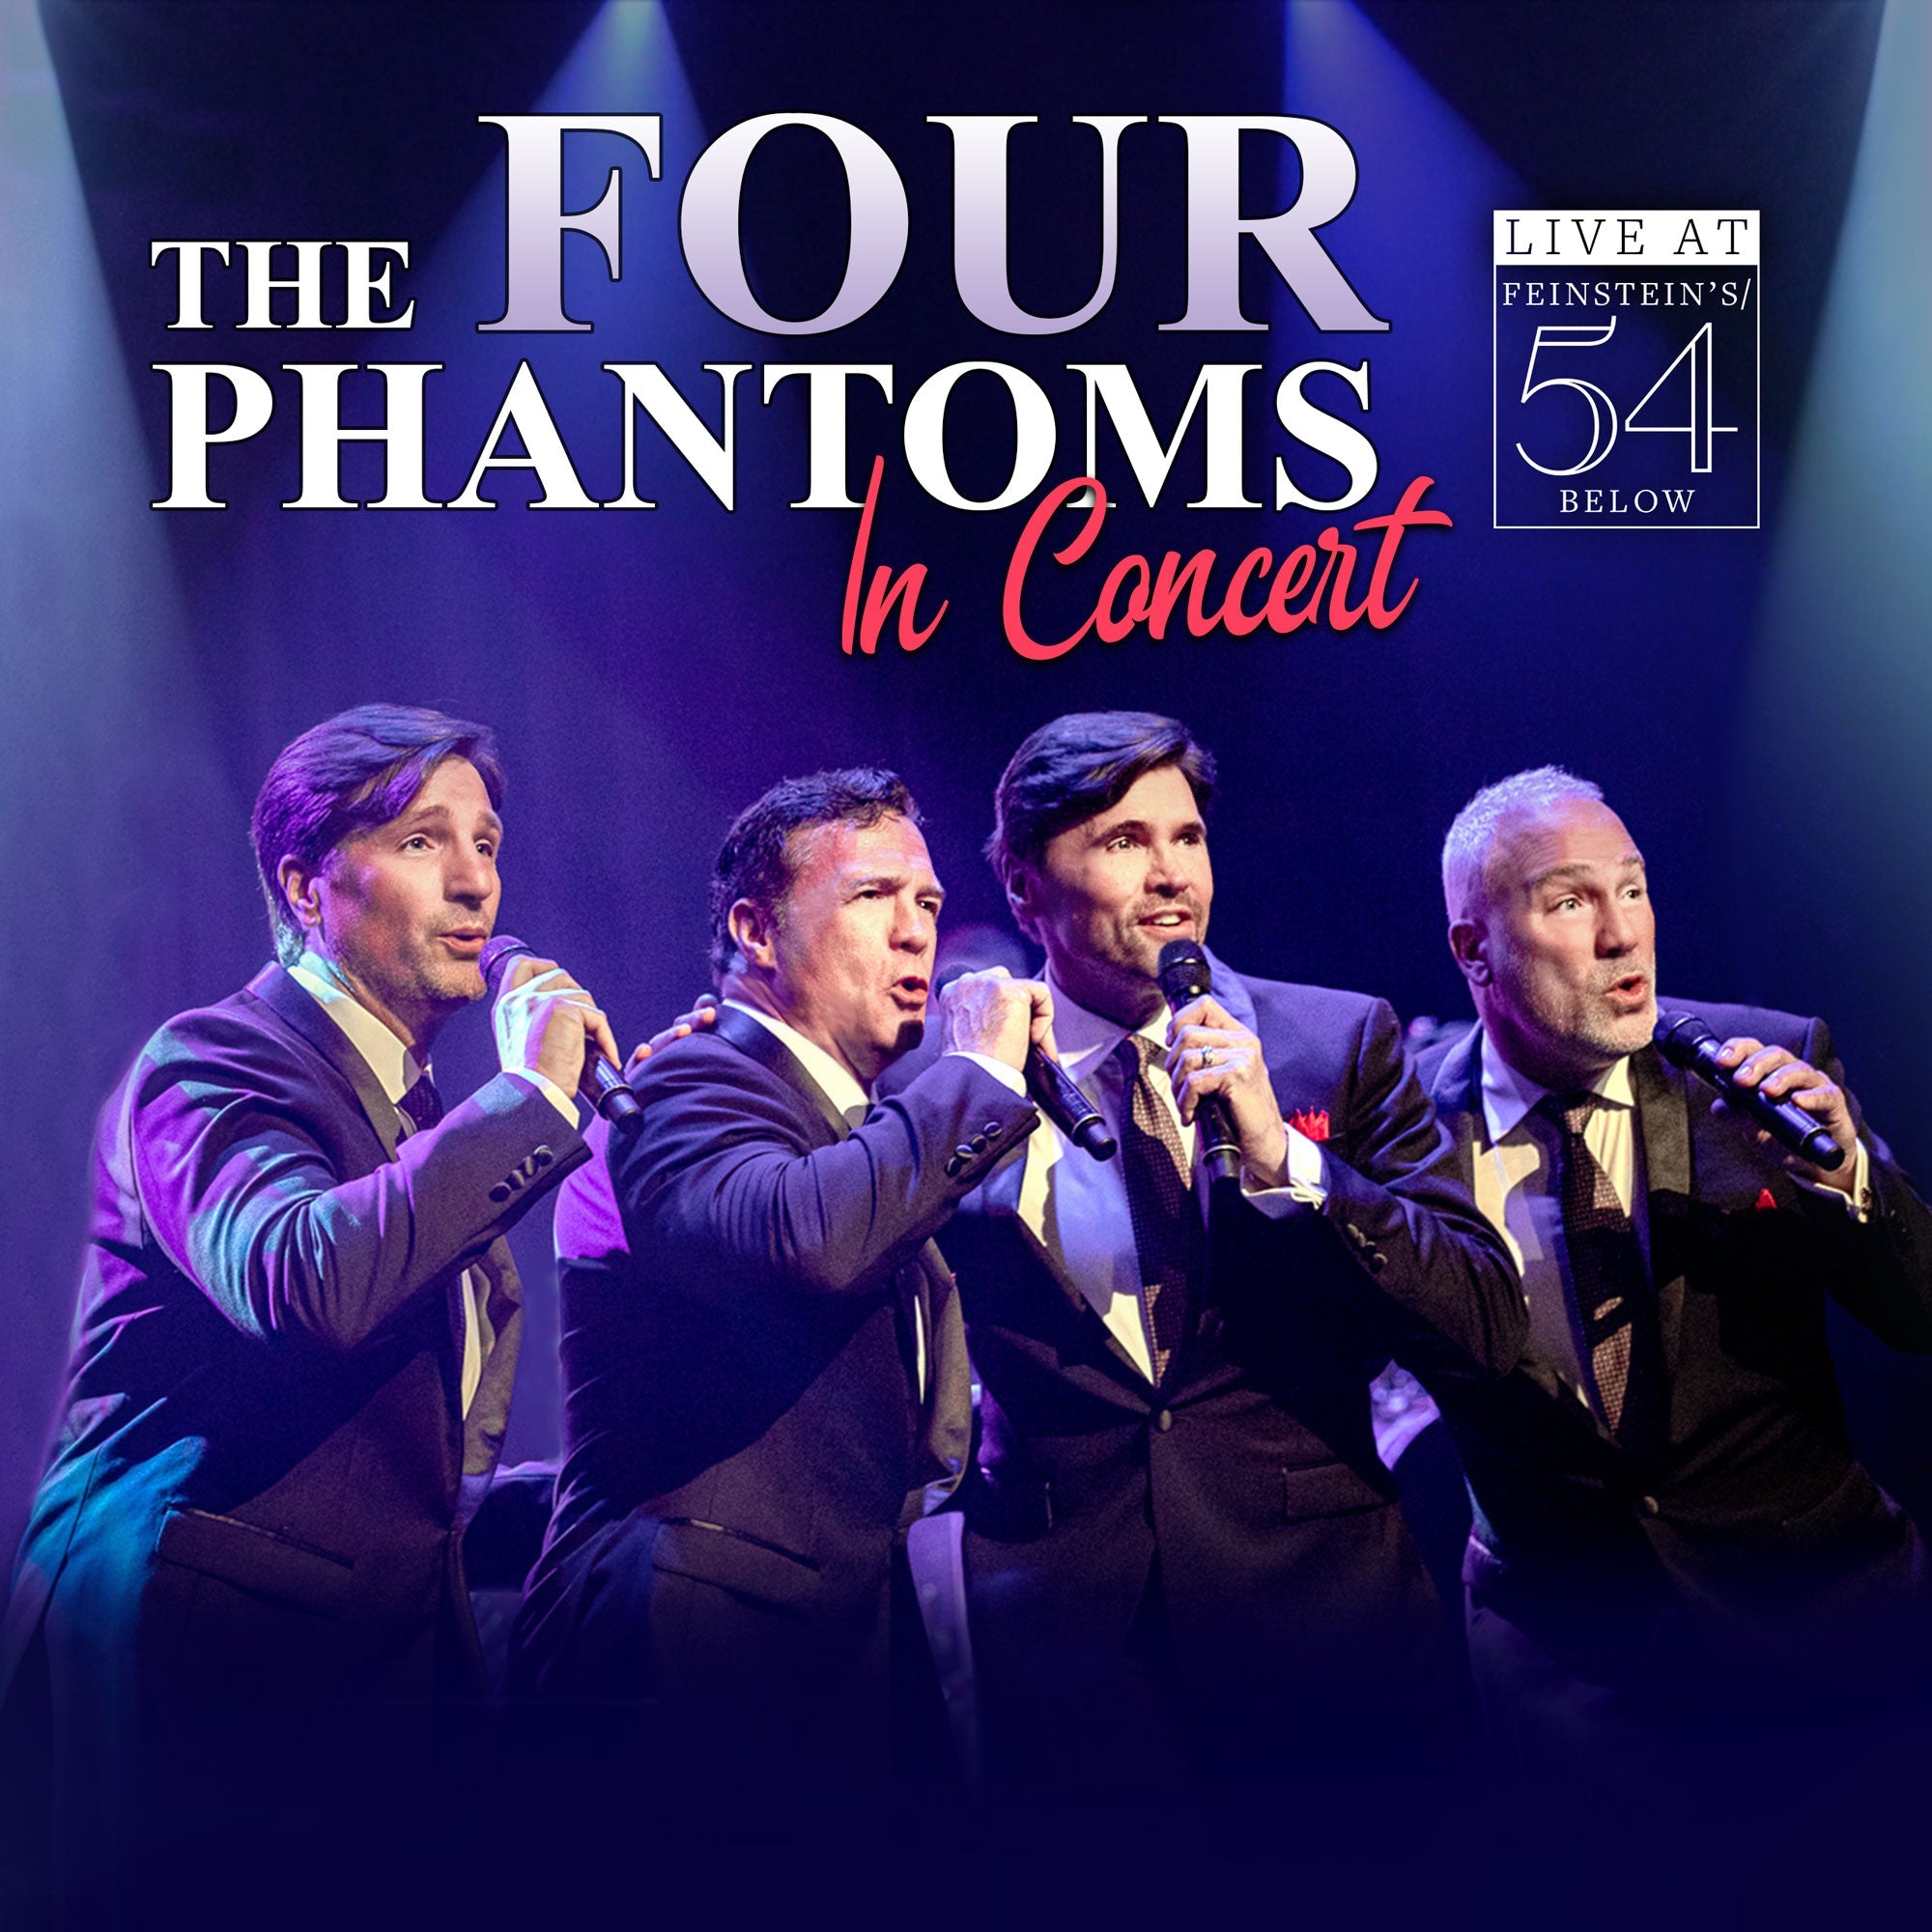 The Four Phantoms in Concert - Live at Feinstein's / 54 Below [MP3]